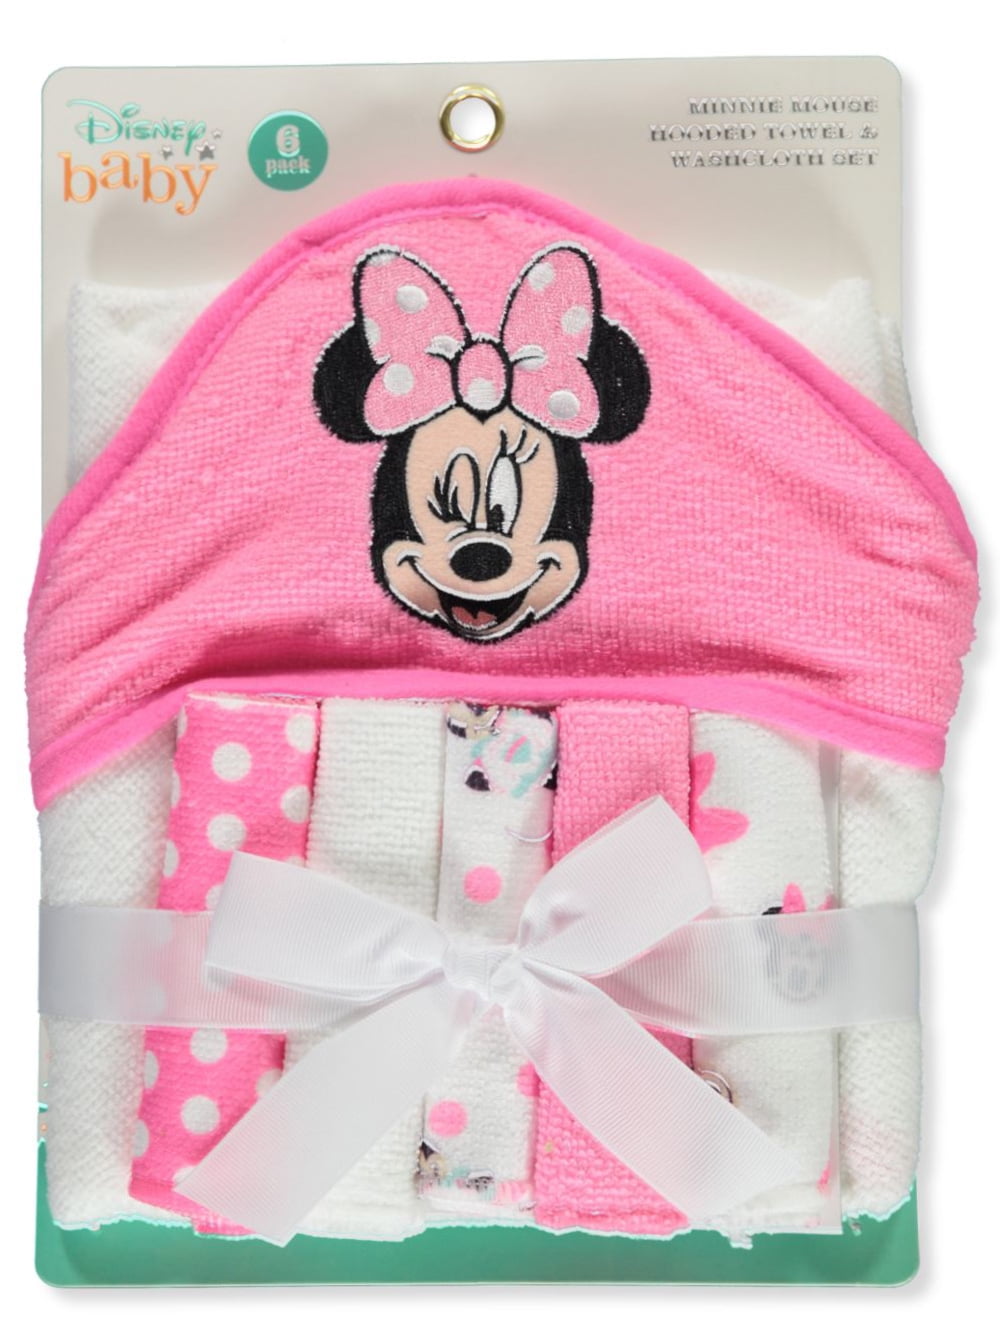 Disney Baby Girls' Minnie Mouse Hooded Towel & Washcloth Set - pink/multi, one size